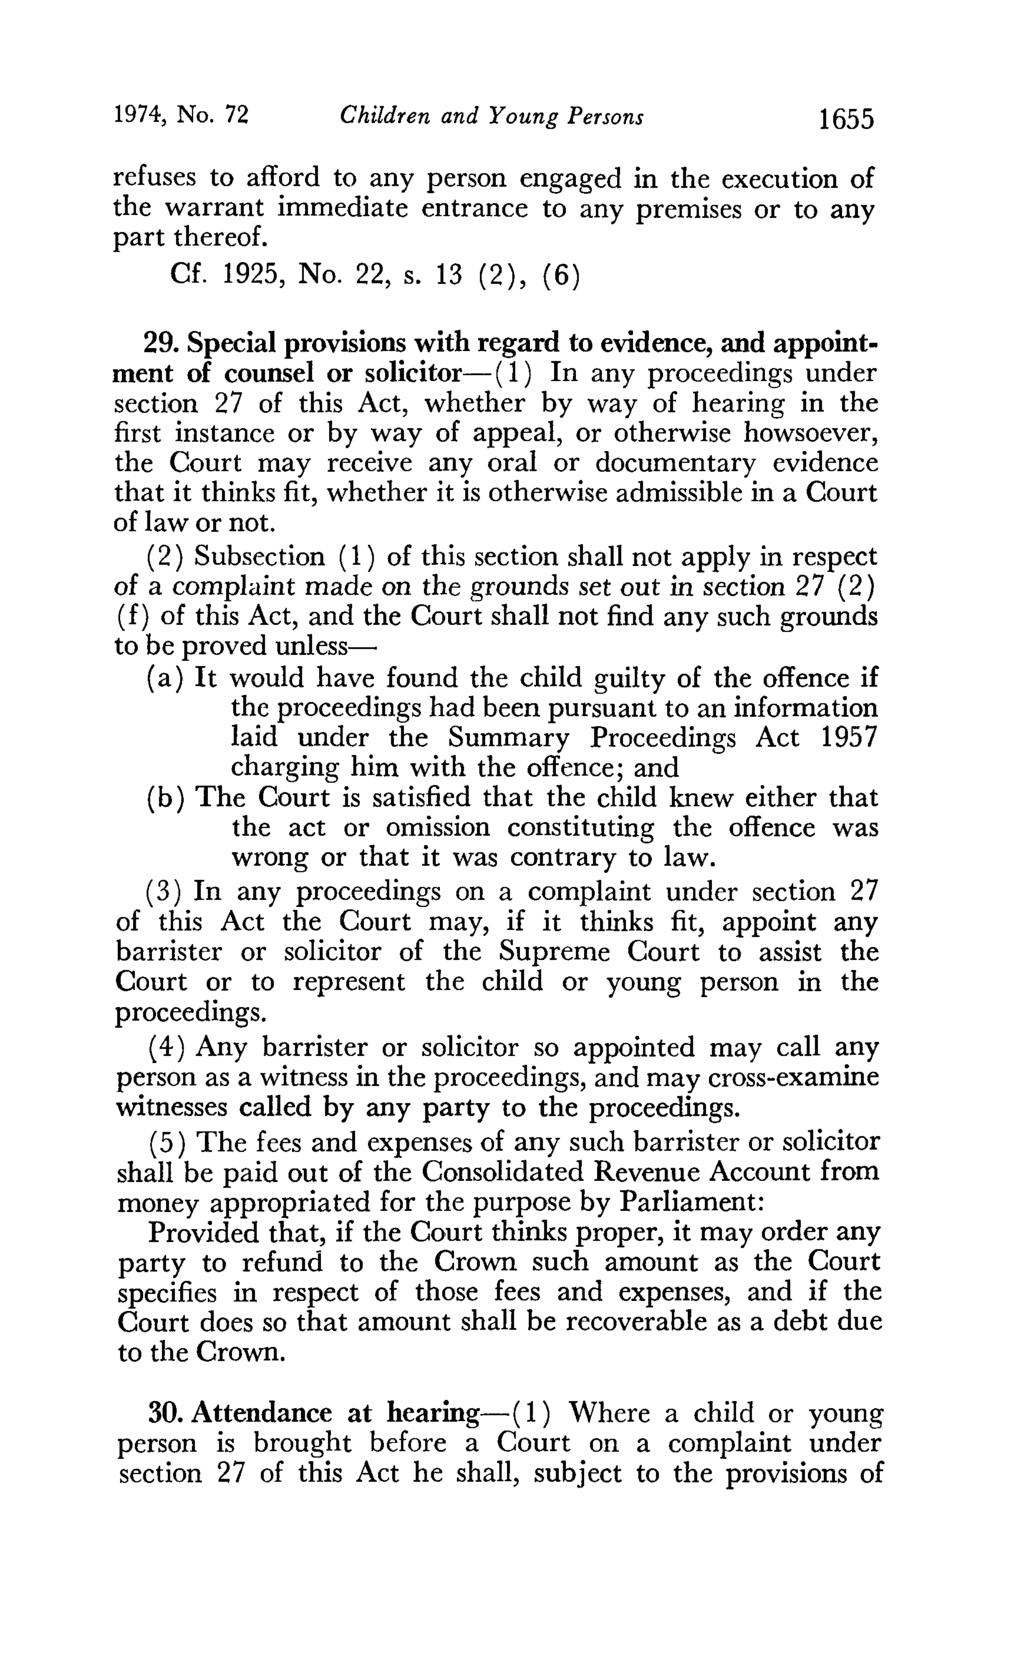 1974, No. 72 Children and Young Persons 1655 refuses to afford to any person engaged in the execution of the warrant immediate entrance to any premises or to any part thereof. Cf. 1925, No. 22, s.